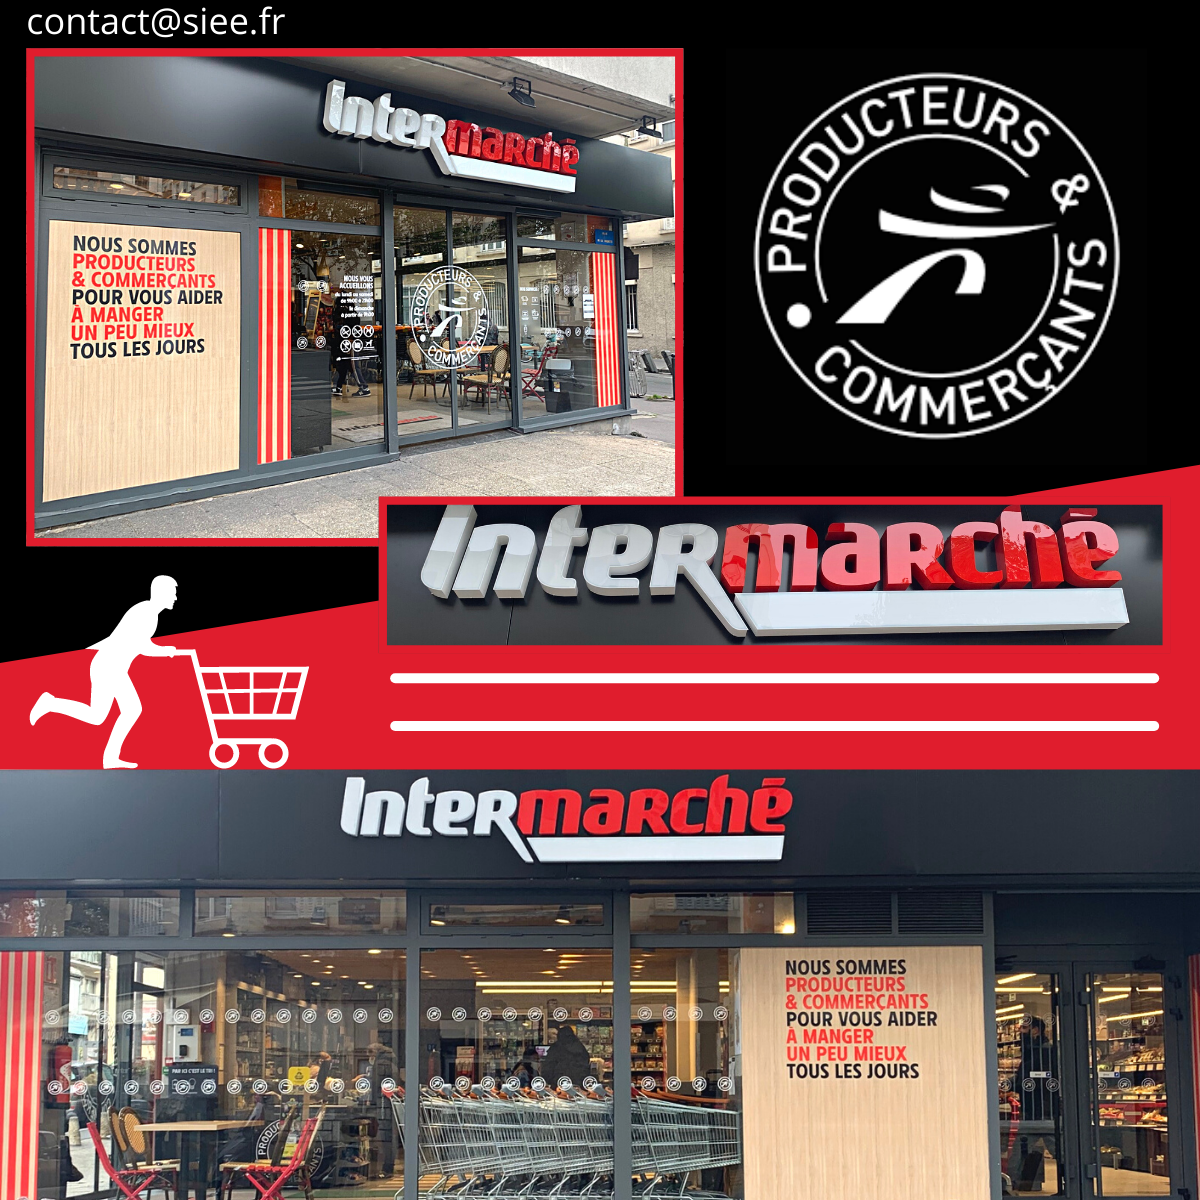 Intermarché by SIEE